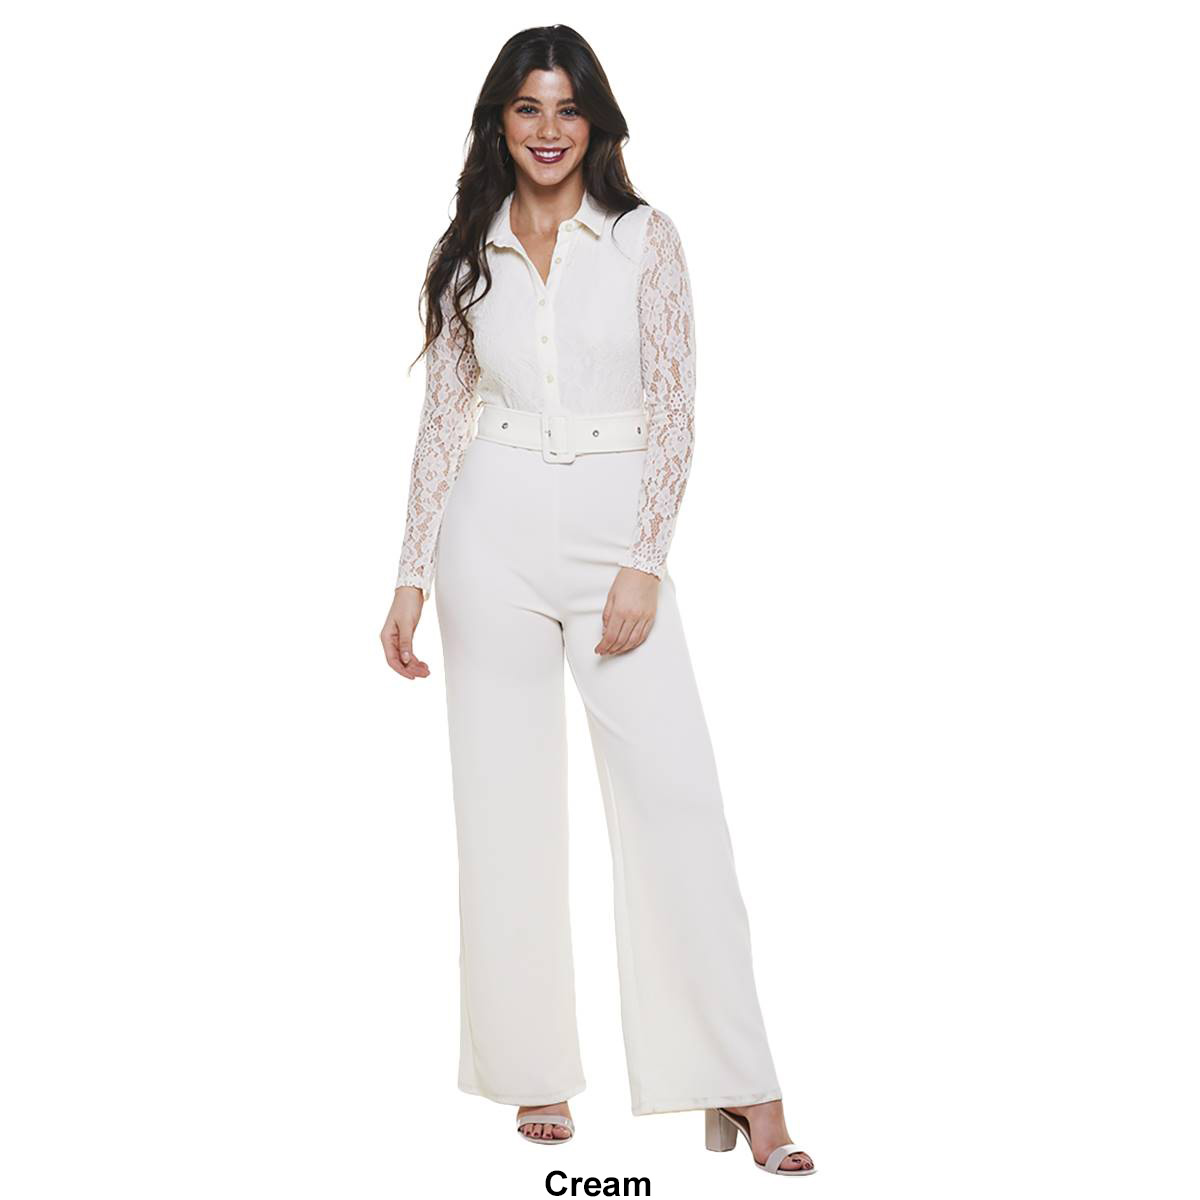 Juniors Almost Famous(tm) Long Sleeve Lace Liverpool Belted Jumpsuit